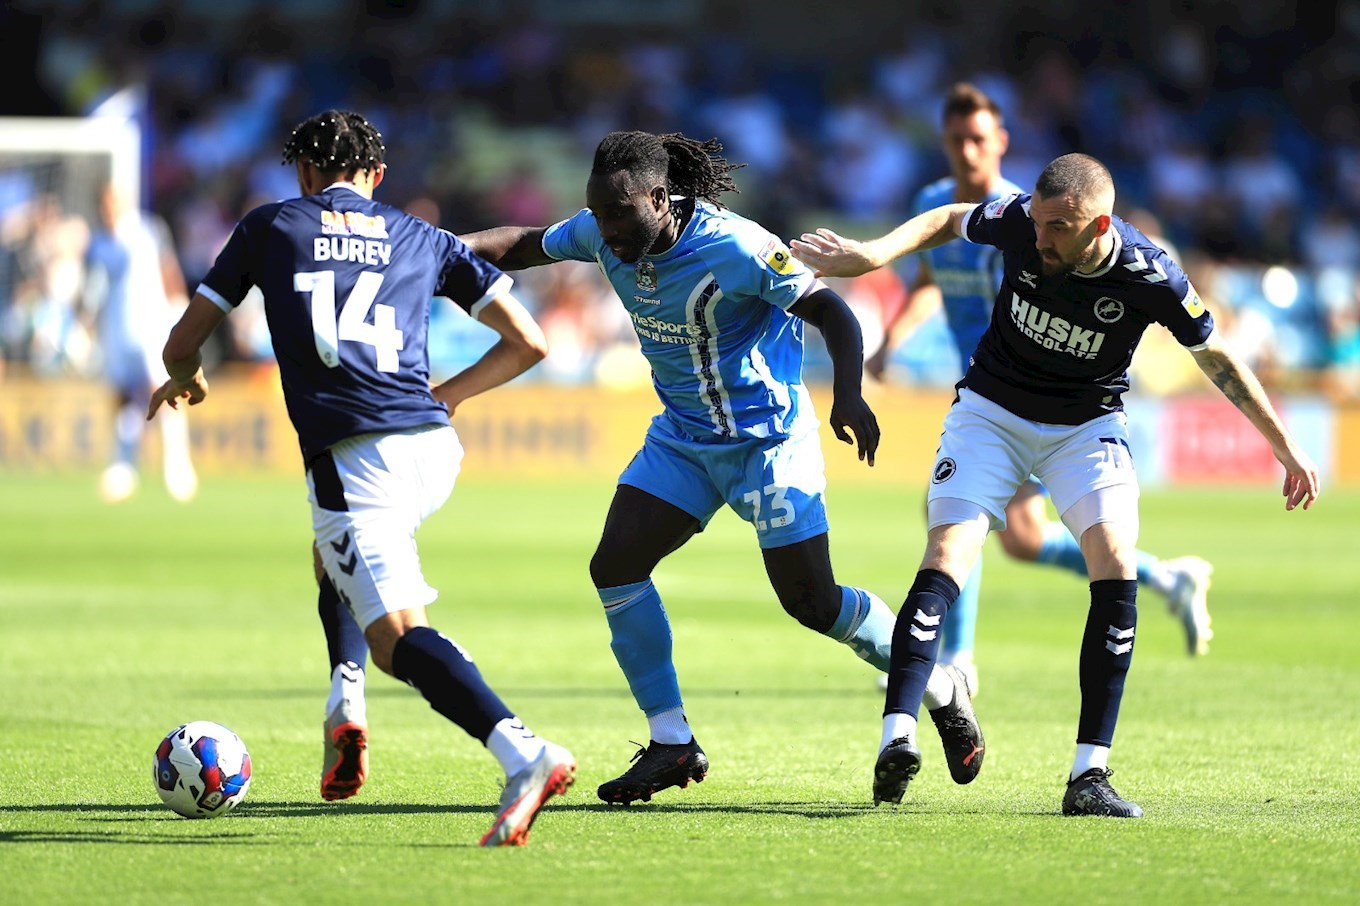 REPORT: Millwall 3-2 Sky Blues - News - Coventry City